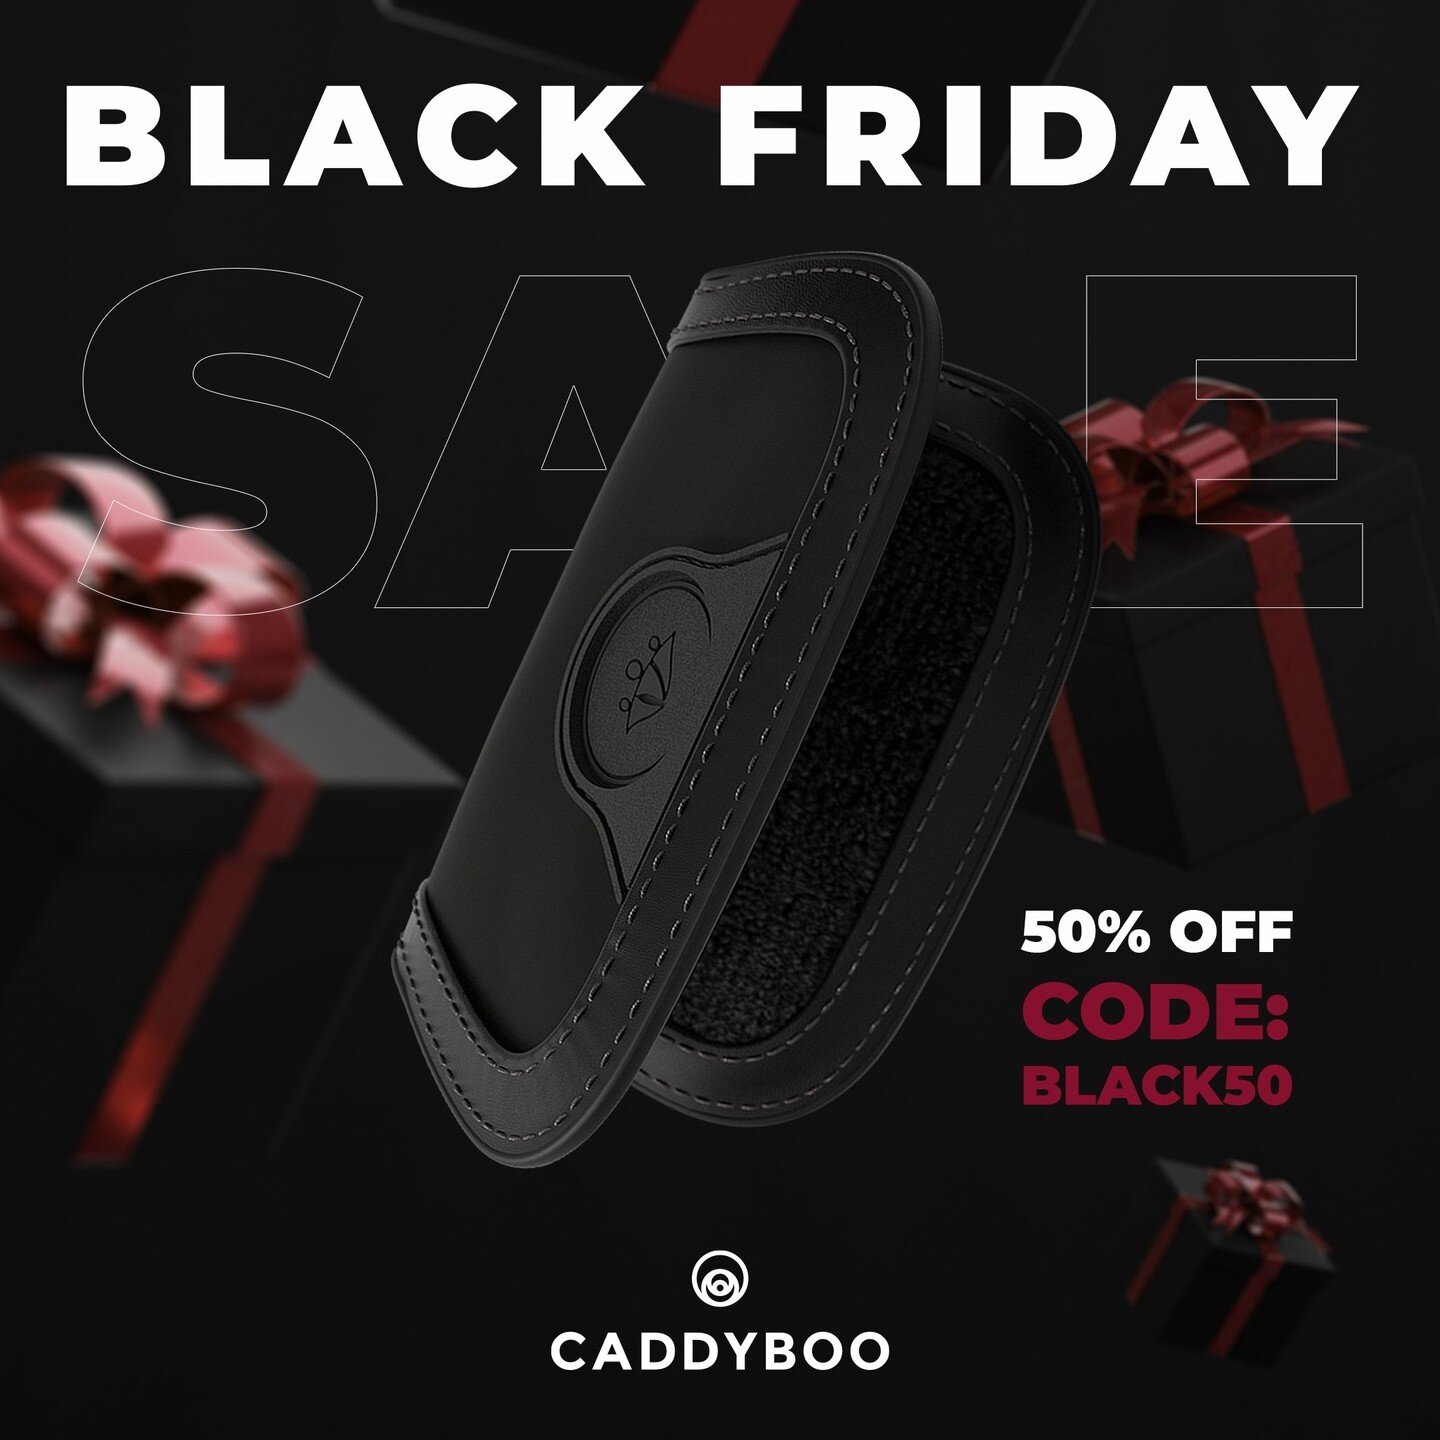 We're exited about our Black Friday Sale!

Chech out our website and grab the high quality accessory using codes:

🔥BLACK50 for 50% off the Caddyboo Bottle and Golf Towels
🔥BLACK40 for 40% off All Leather Products

Huge savings on our exclusive ran